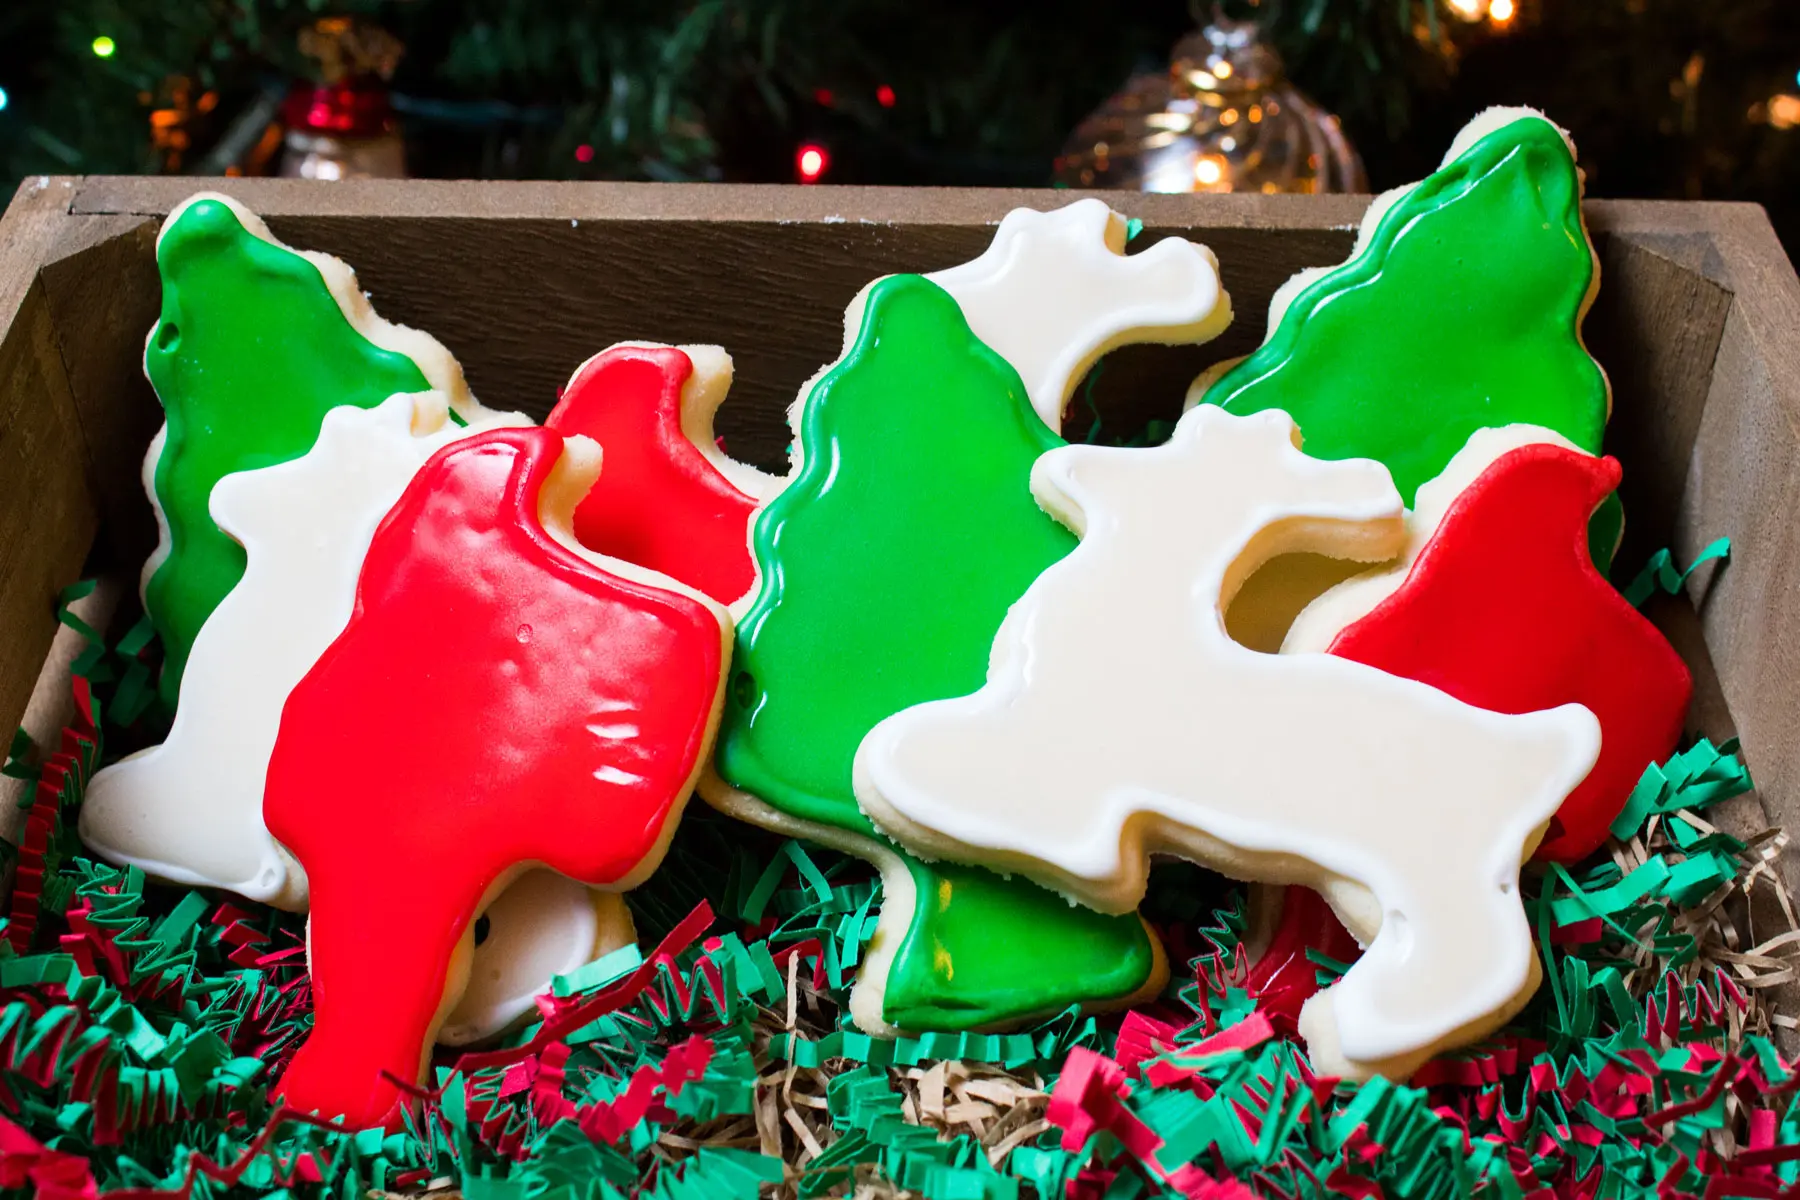 Glossy Sugar Cookie Icing (that hardens) is an easy icing for holiday sugar cookie decorating